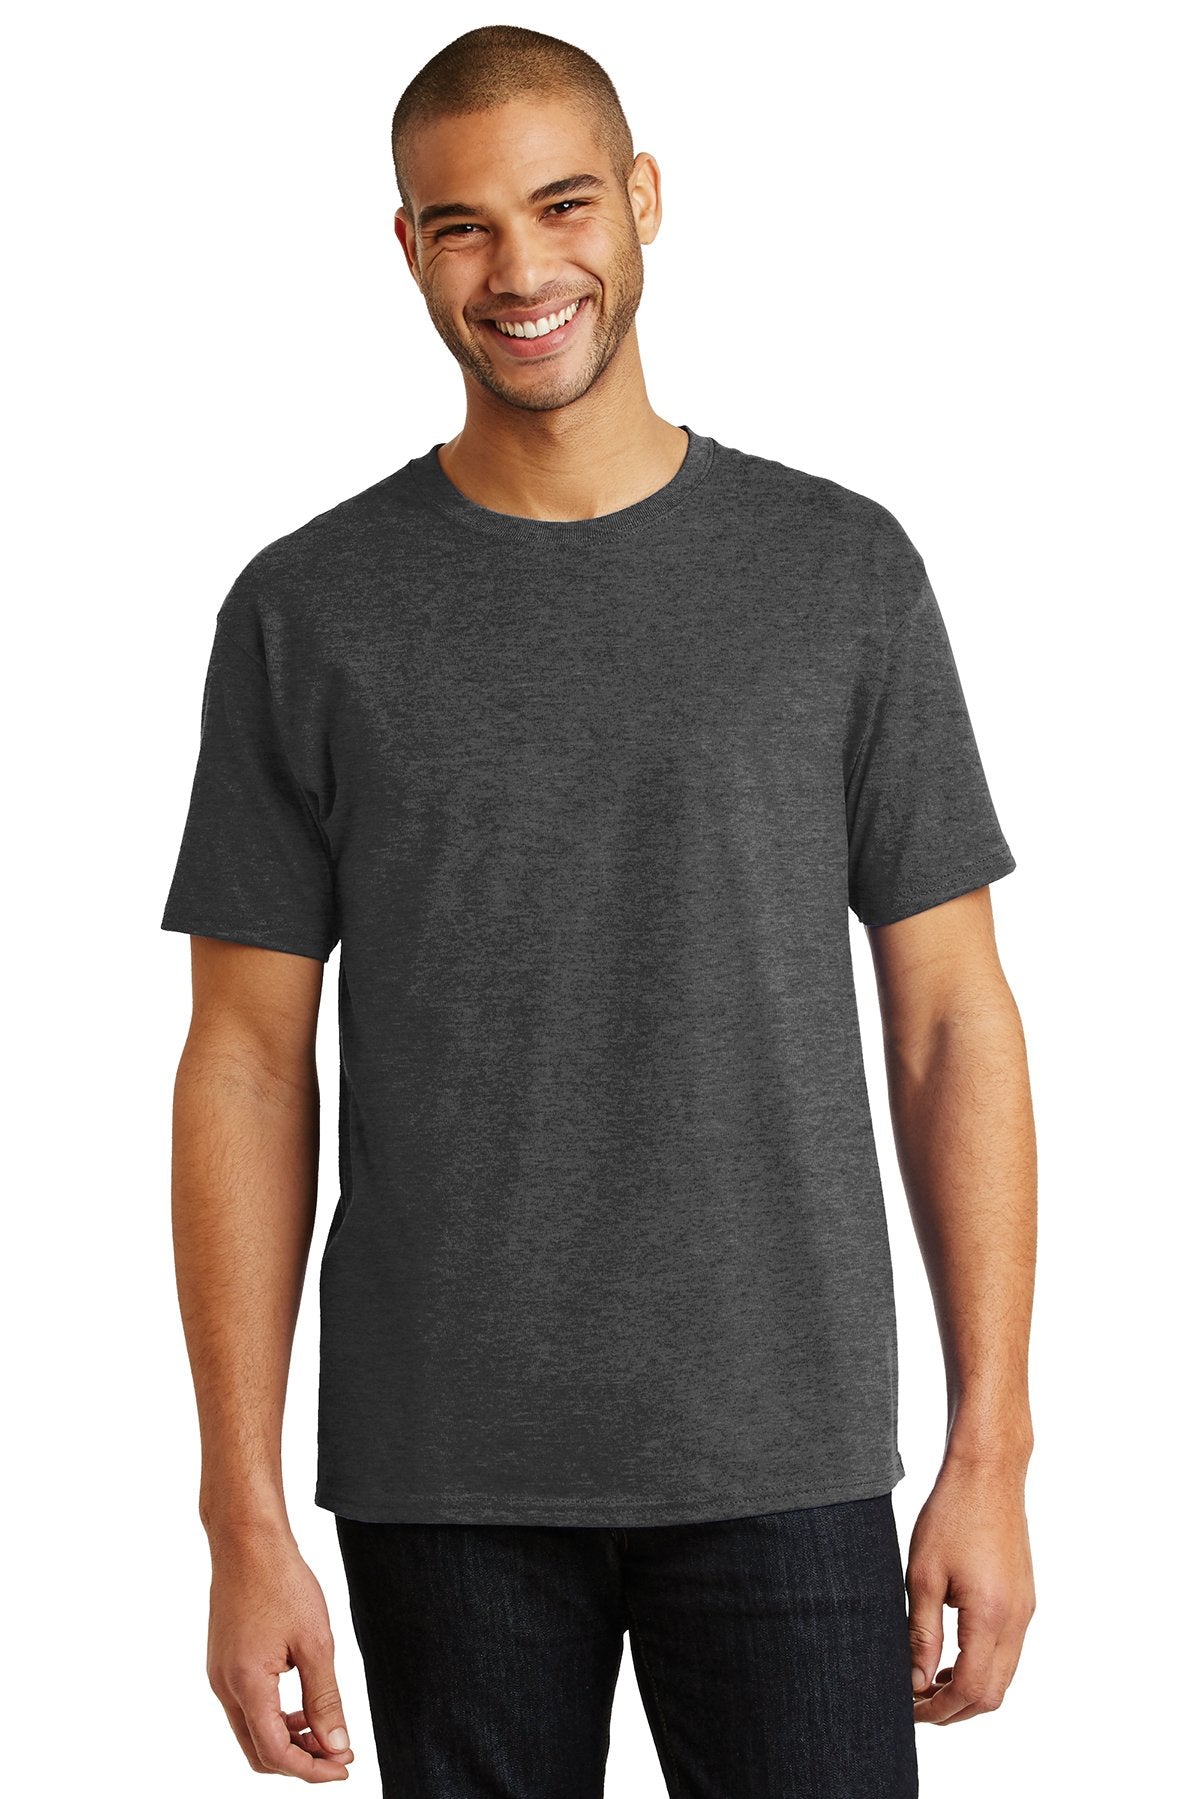 hanes tagless cotton t shirt 5250 charcoal heather